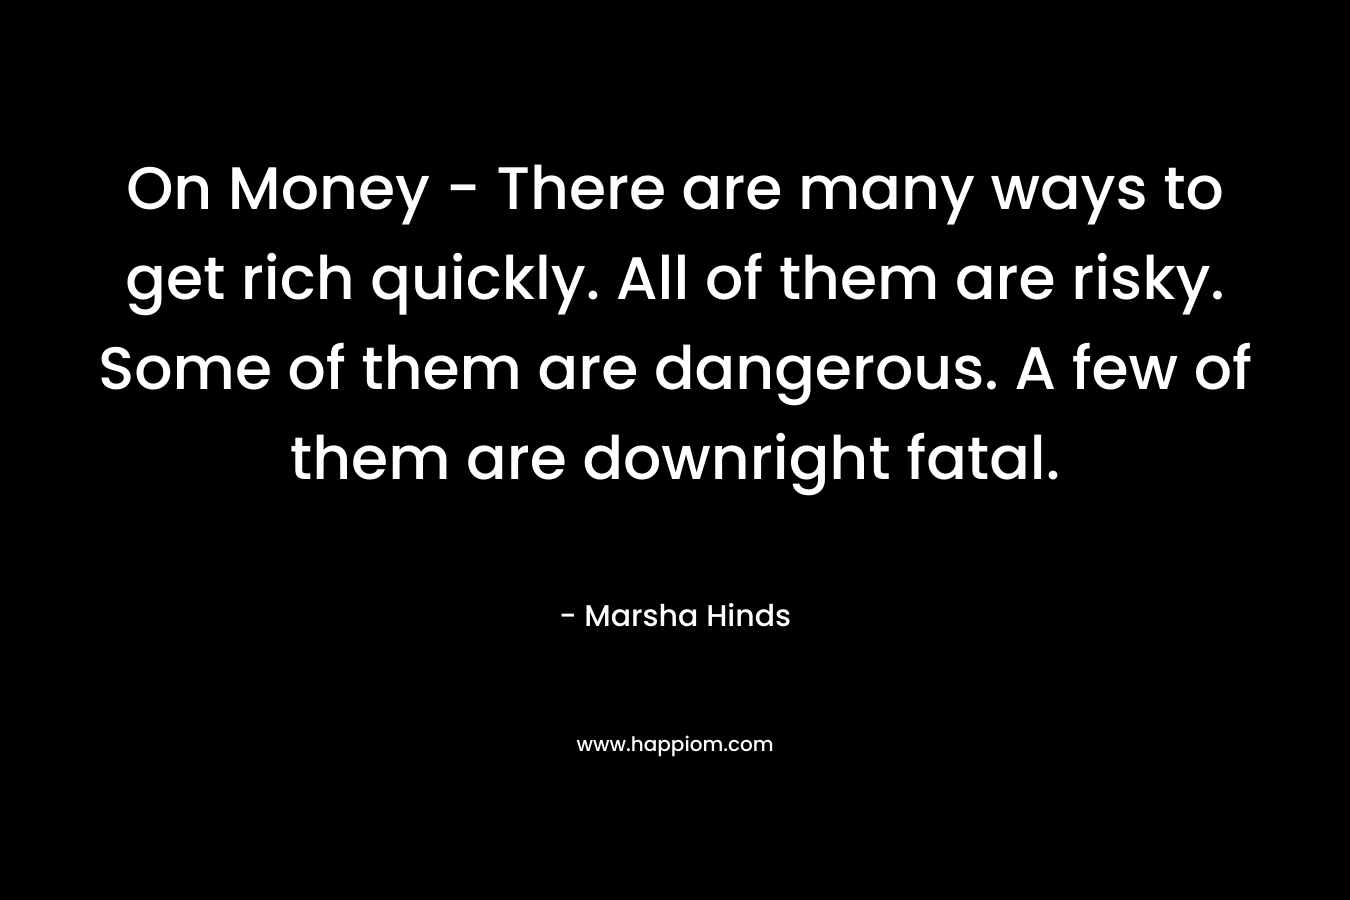 On Money – There are many ways to get rich quickly. All of them are risky. Some of them are dangerous. A few of them are downright fatal. – Marsha Hinds